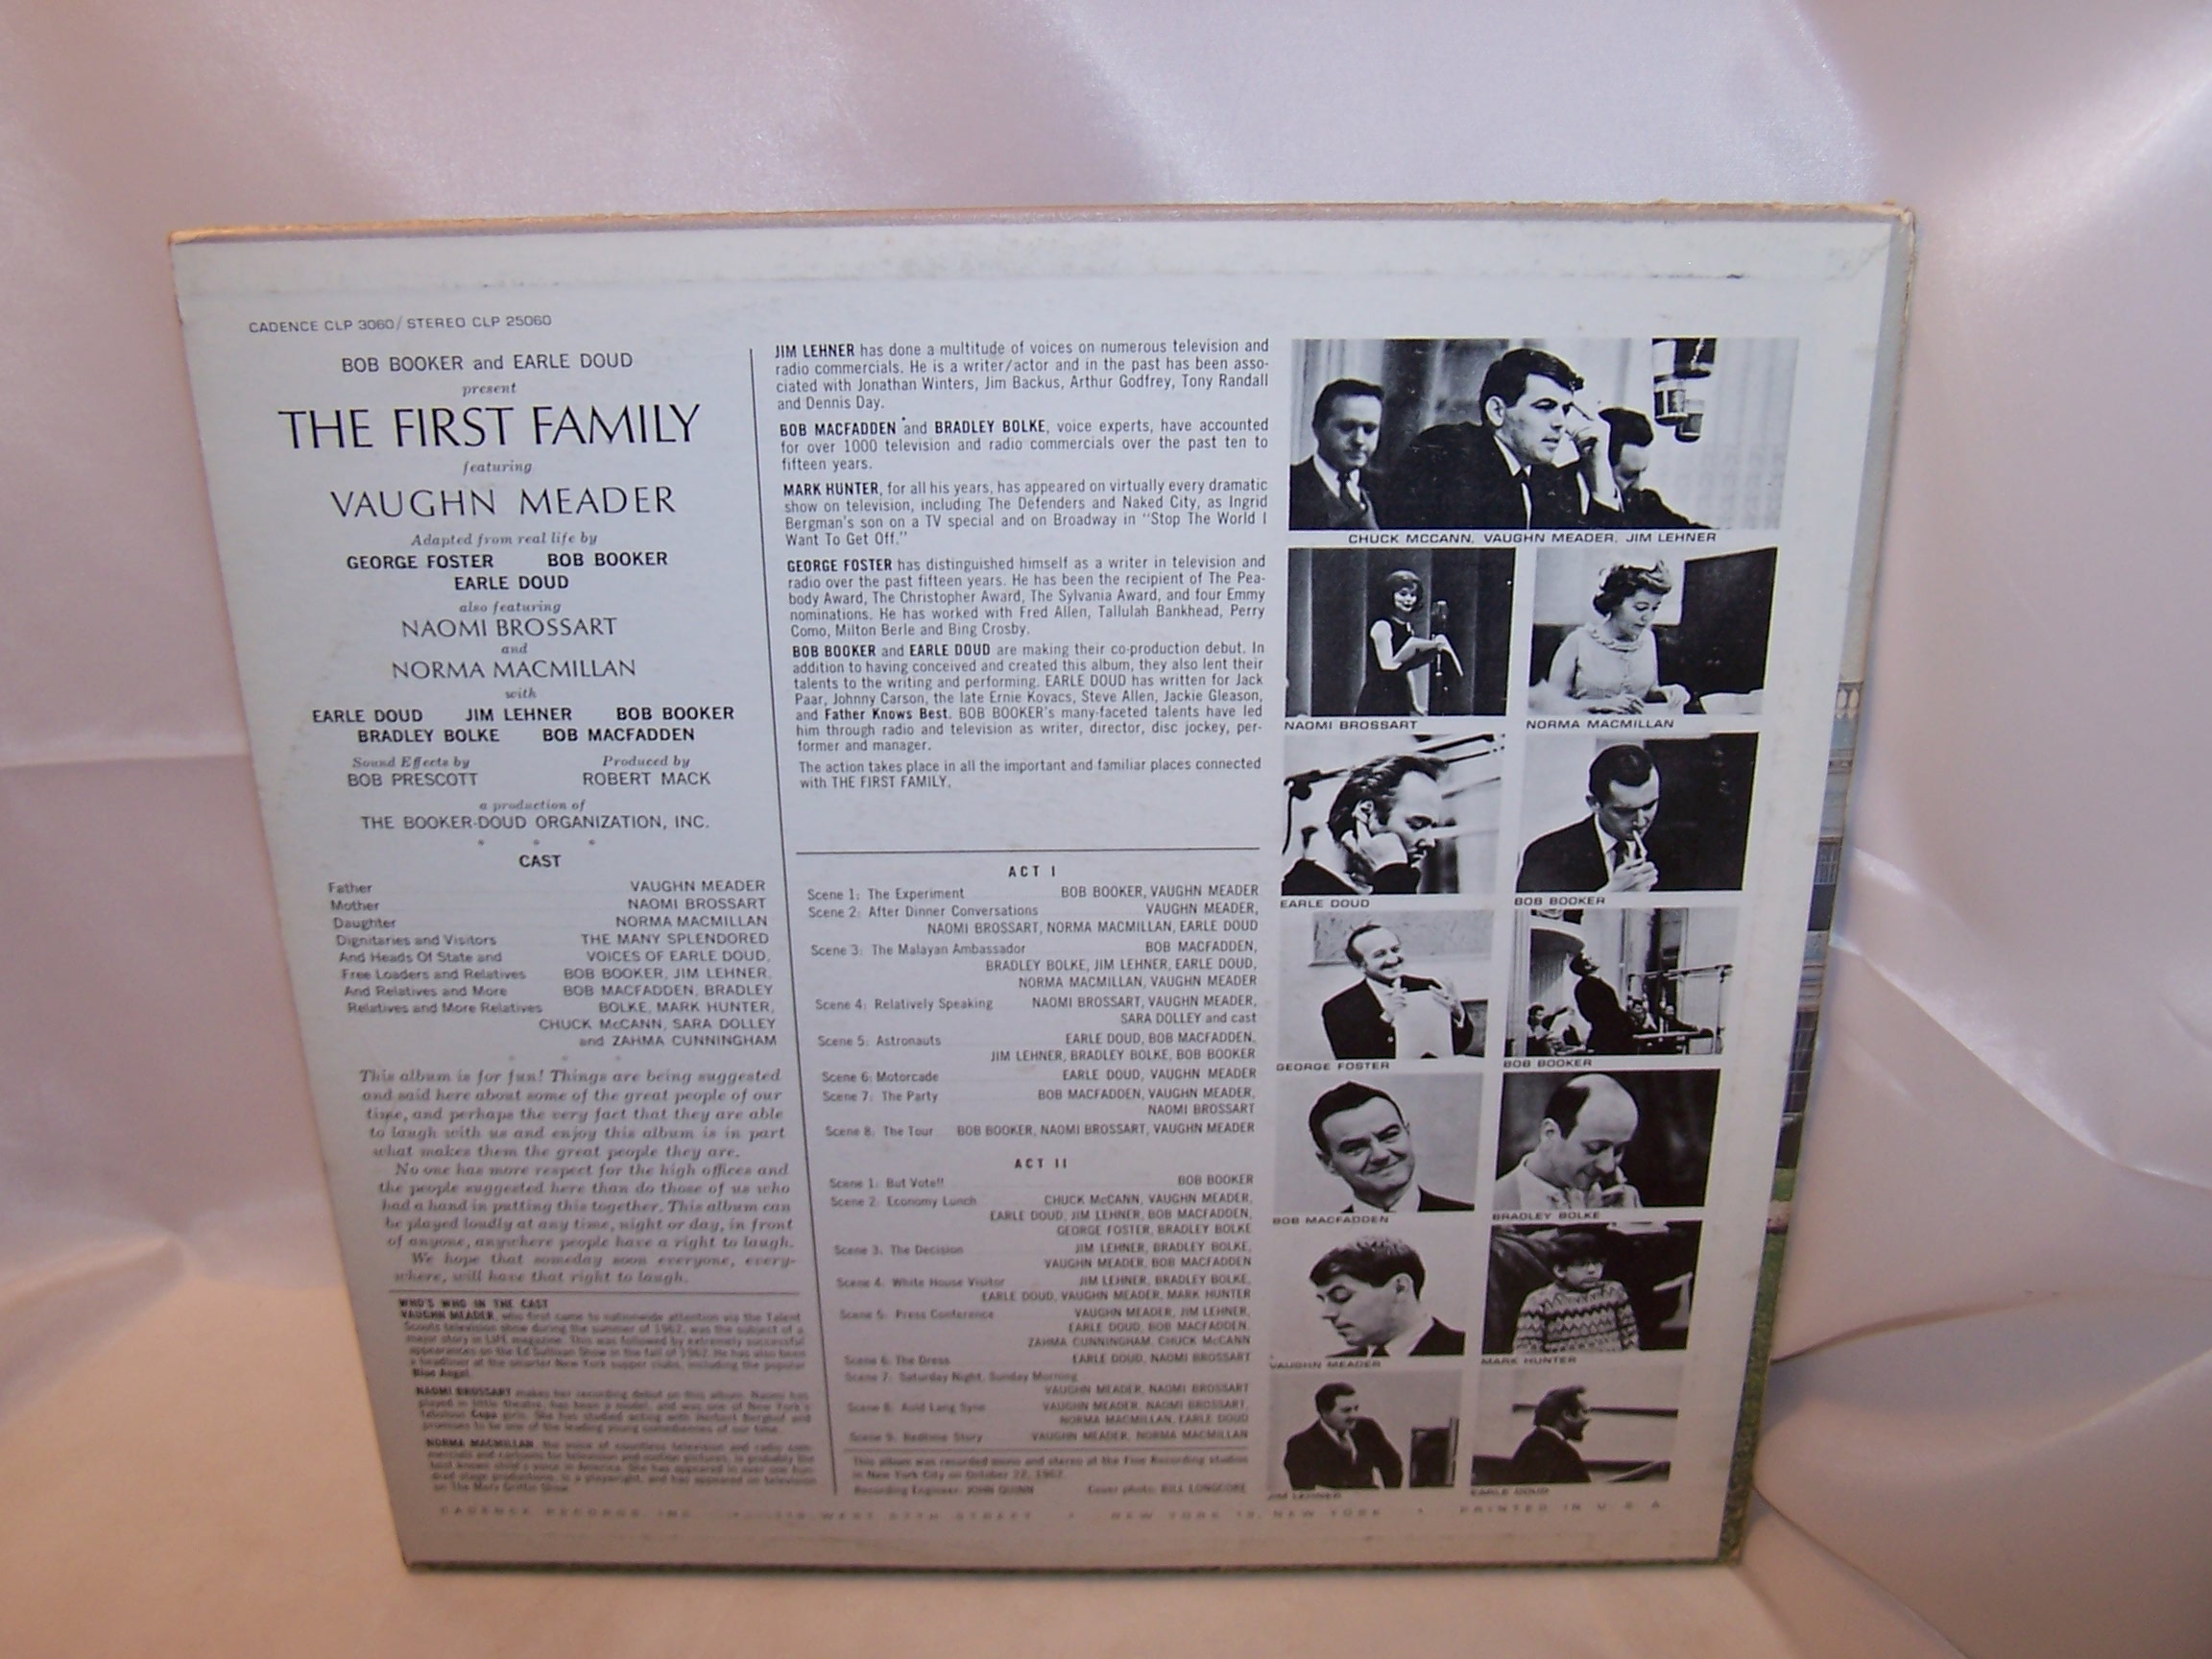 Image 3 of The First Family Record, Booker and Doud, 1962